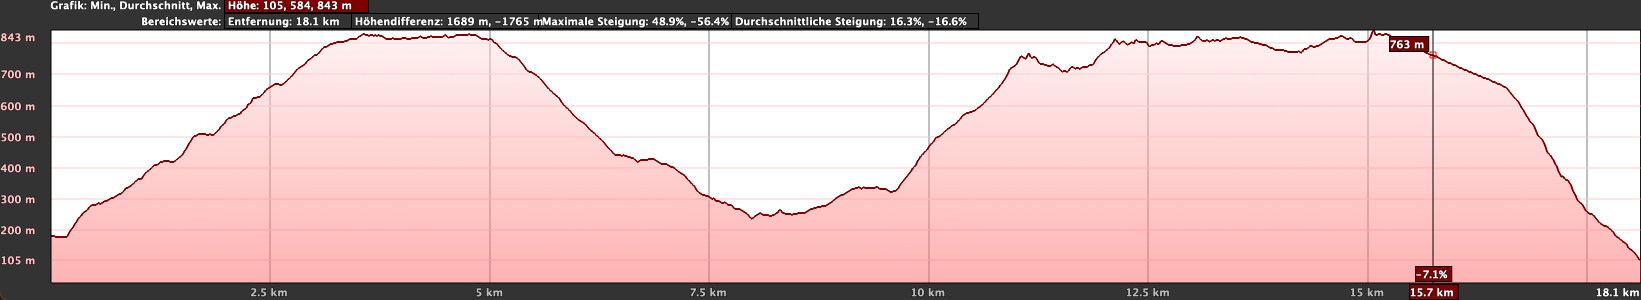 Elevation profile of hike GR-132 stages 3 and 4 from Vallehermoso via Alojera to Valle Gran Rey